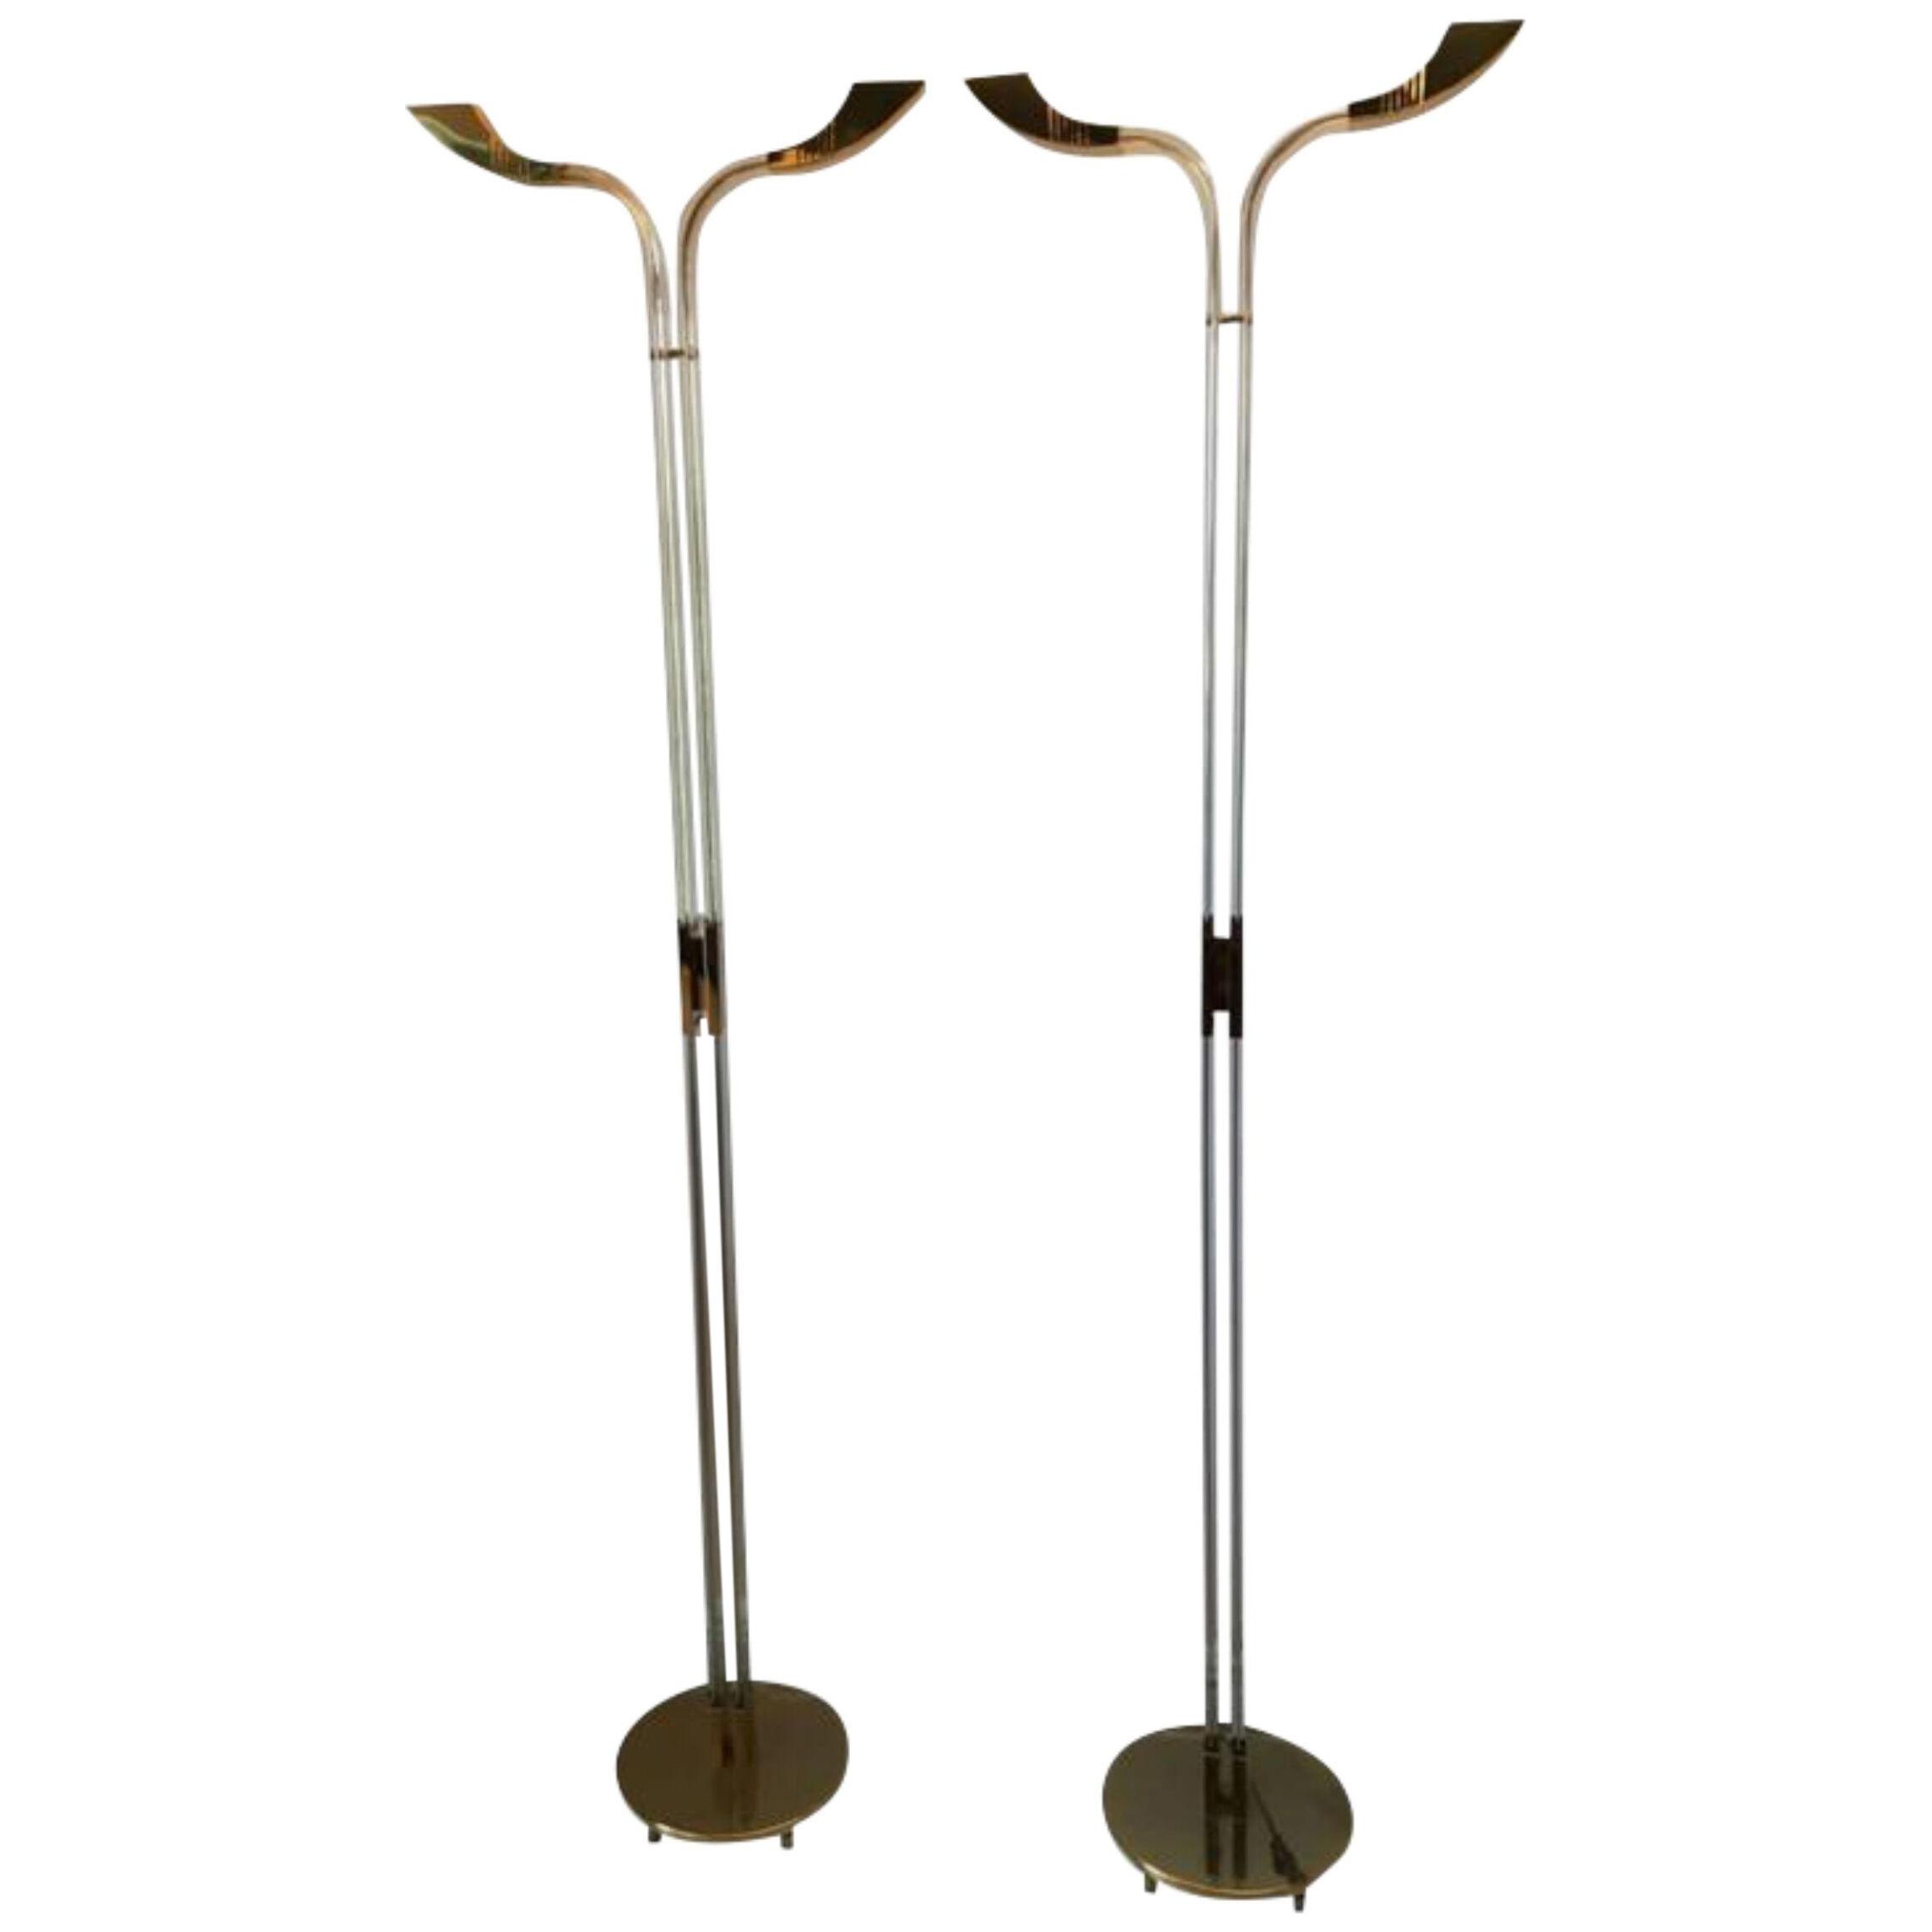 Modernist Italian Brass and Lucite Floor Lamps - a Pair